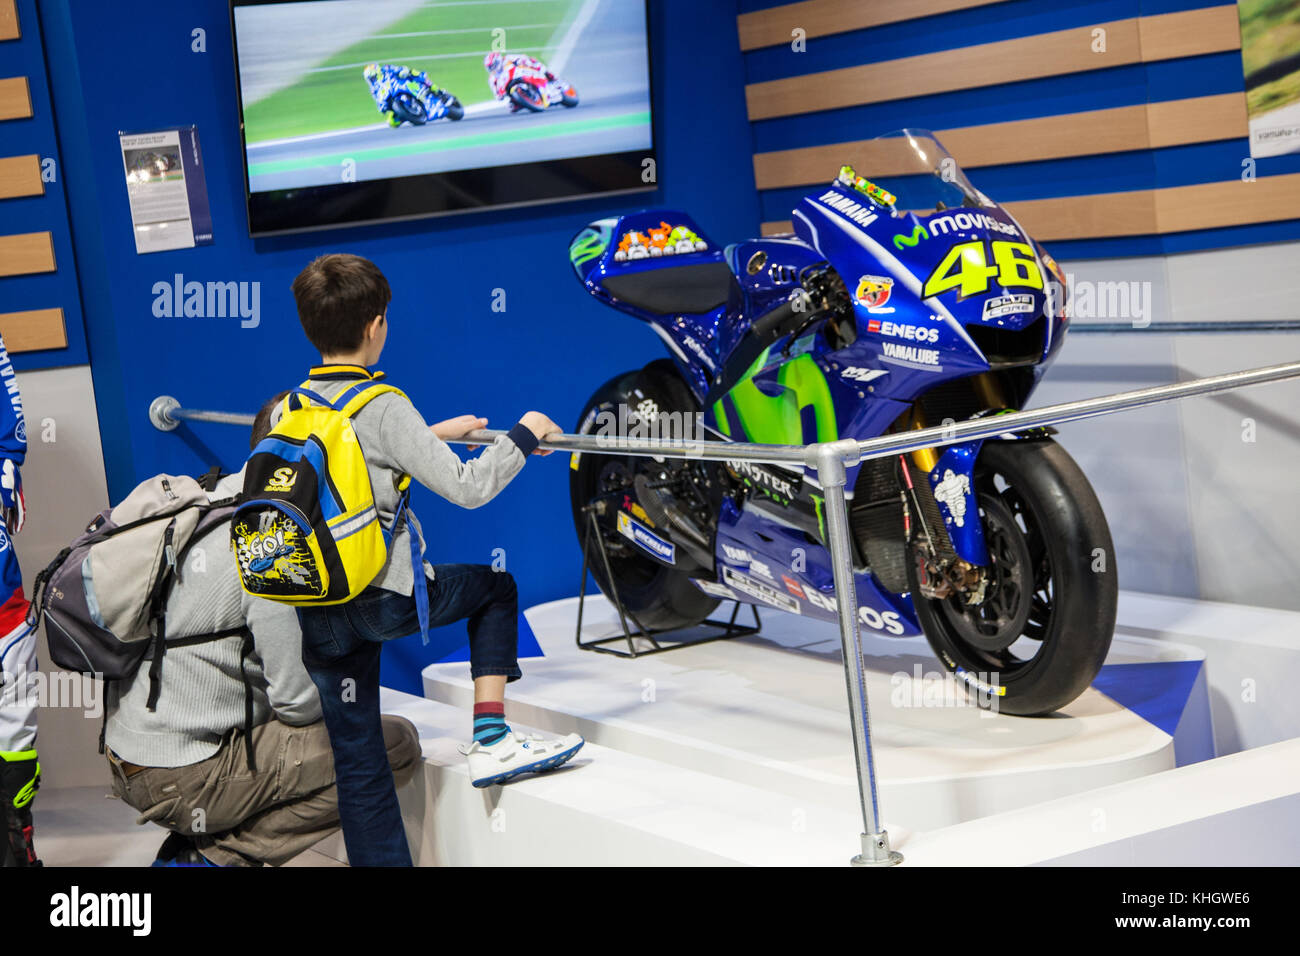 A dad and his son checking out Valentino Rossi Yamaha MotoGP bike at  Motorcycle Live Credit: steven roe/Alamy Live News Stock Photo - Alamy